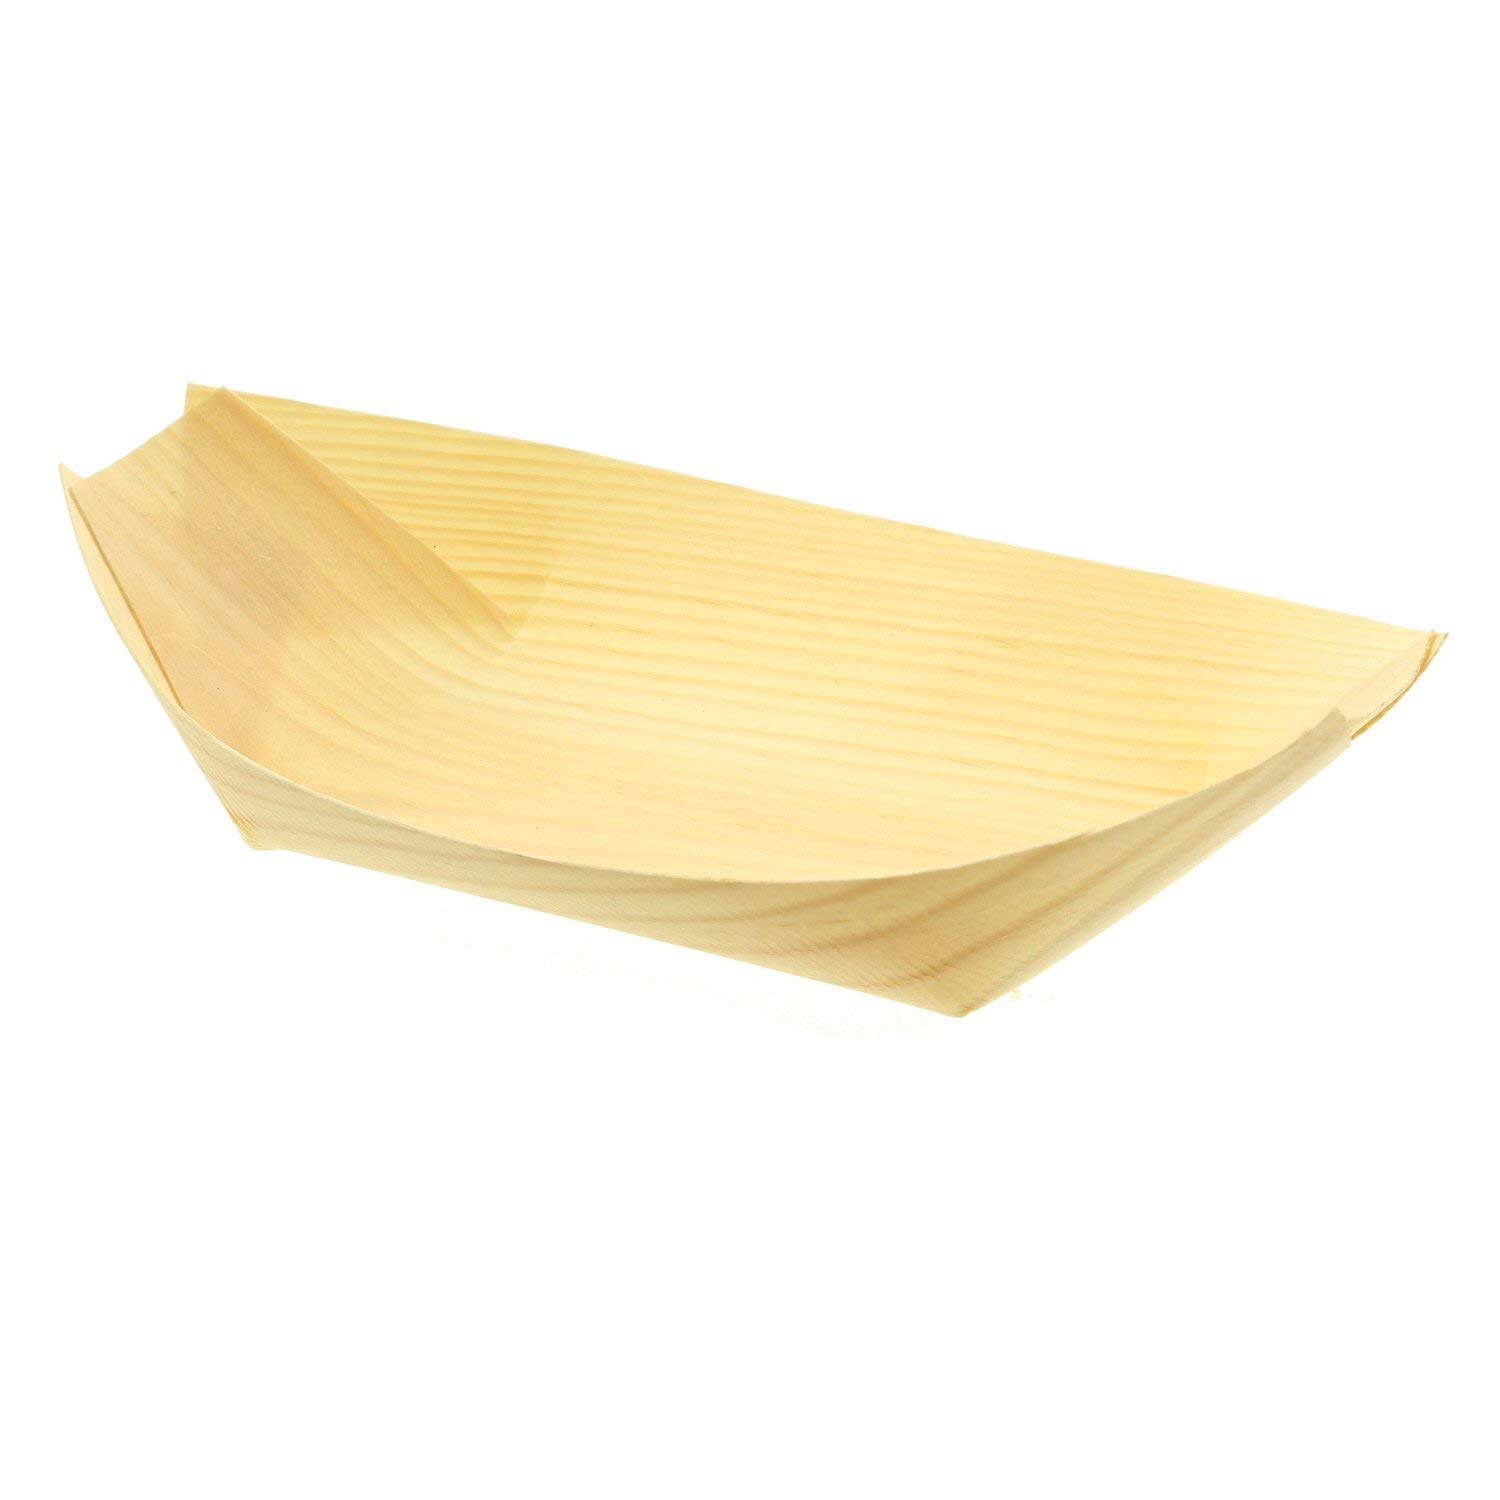 Produce Wood Serving Boat, Quality Wood Serving Boat, Biodegradable Wood Food Boat Factory